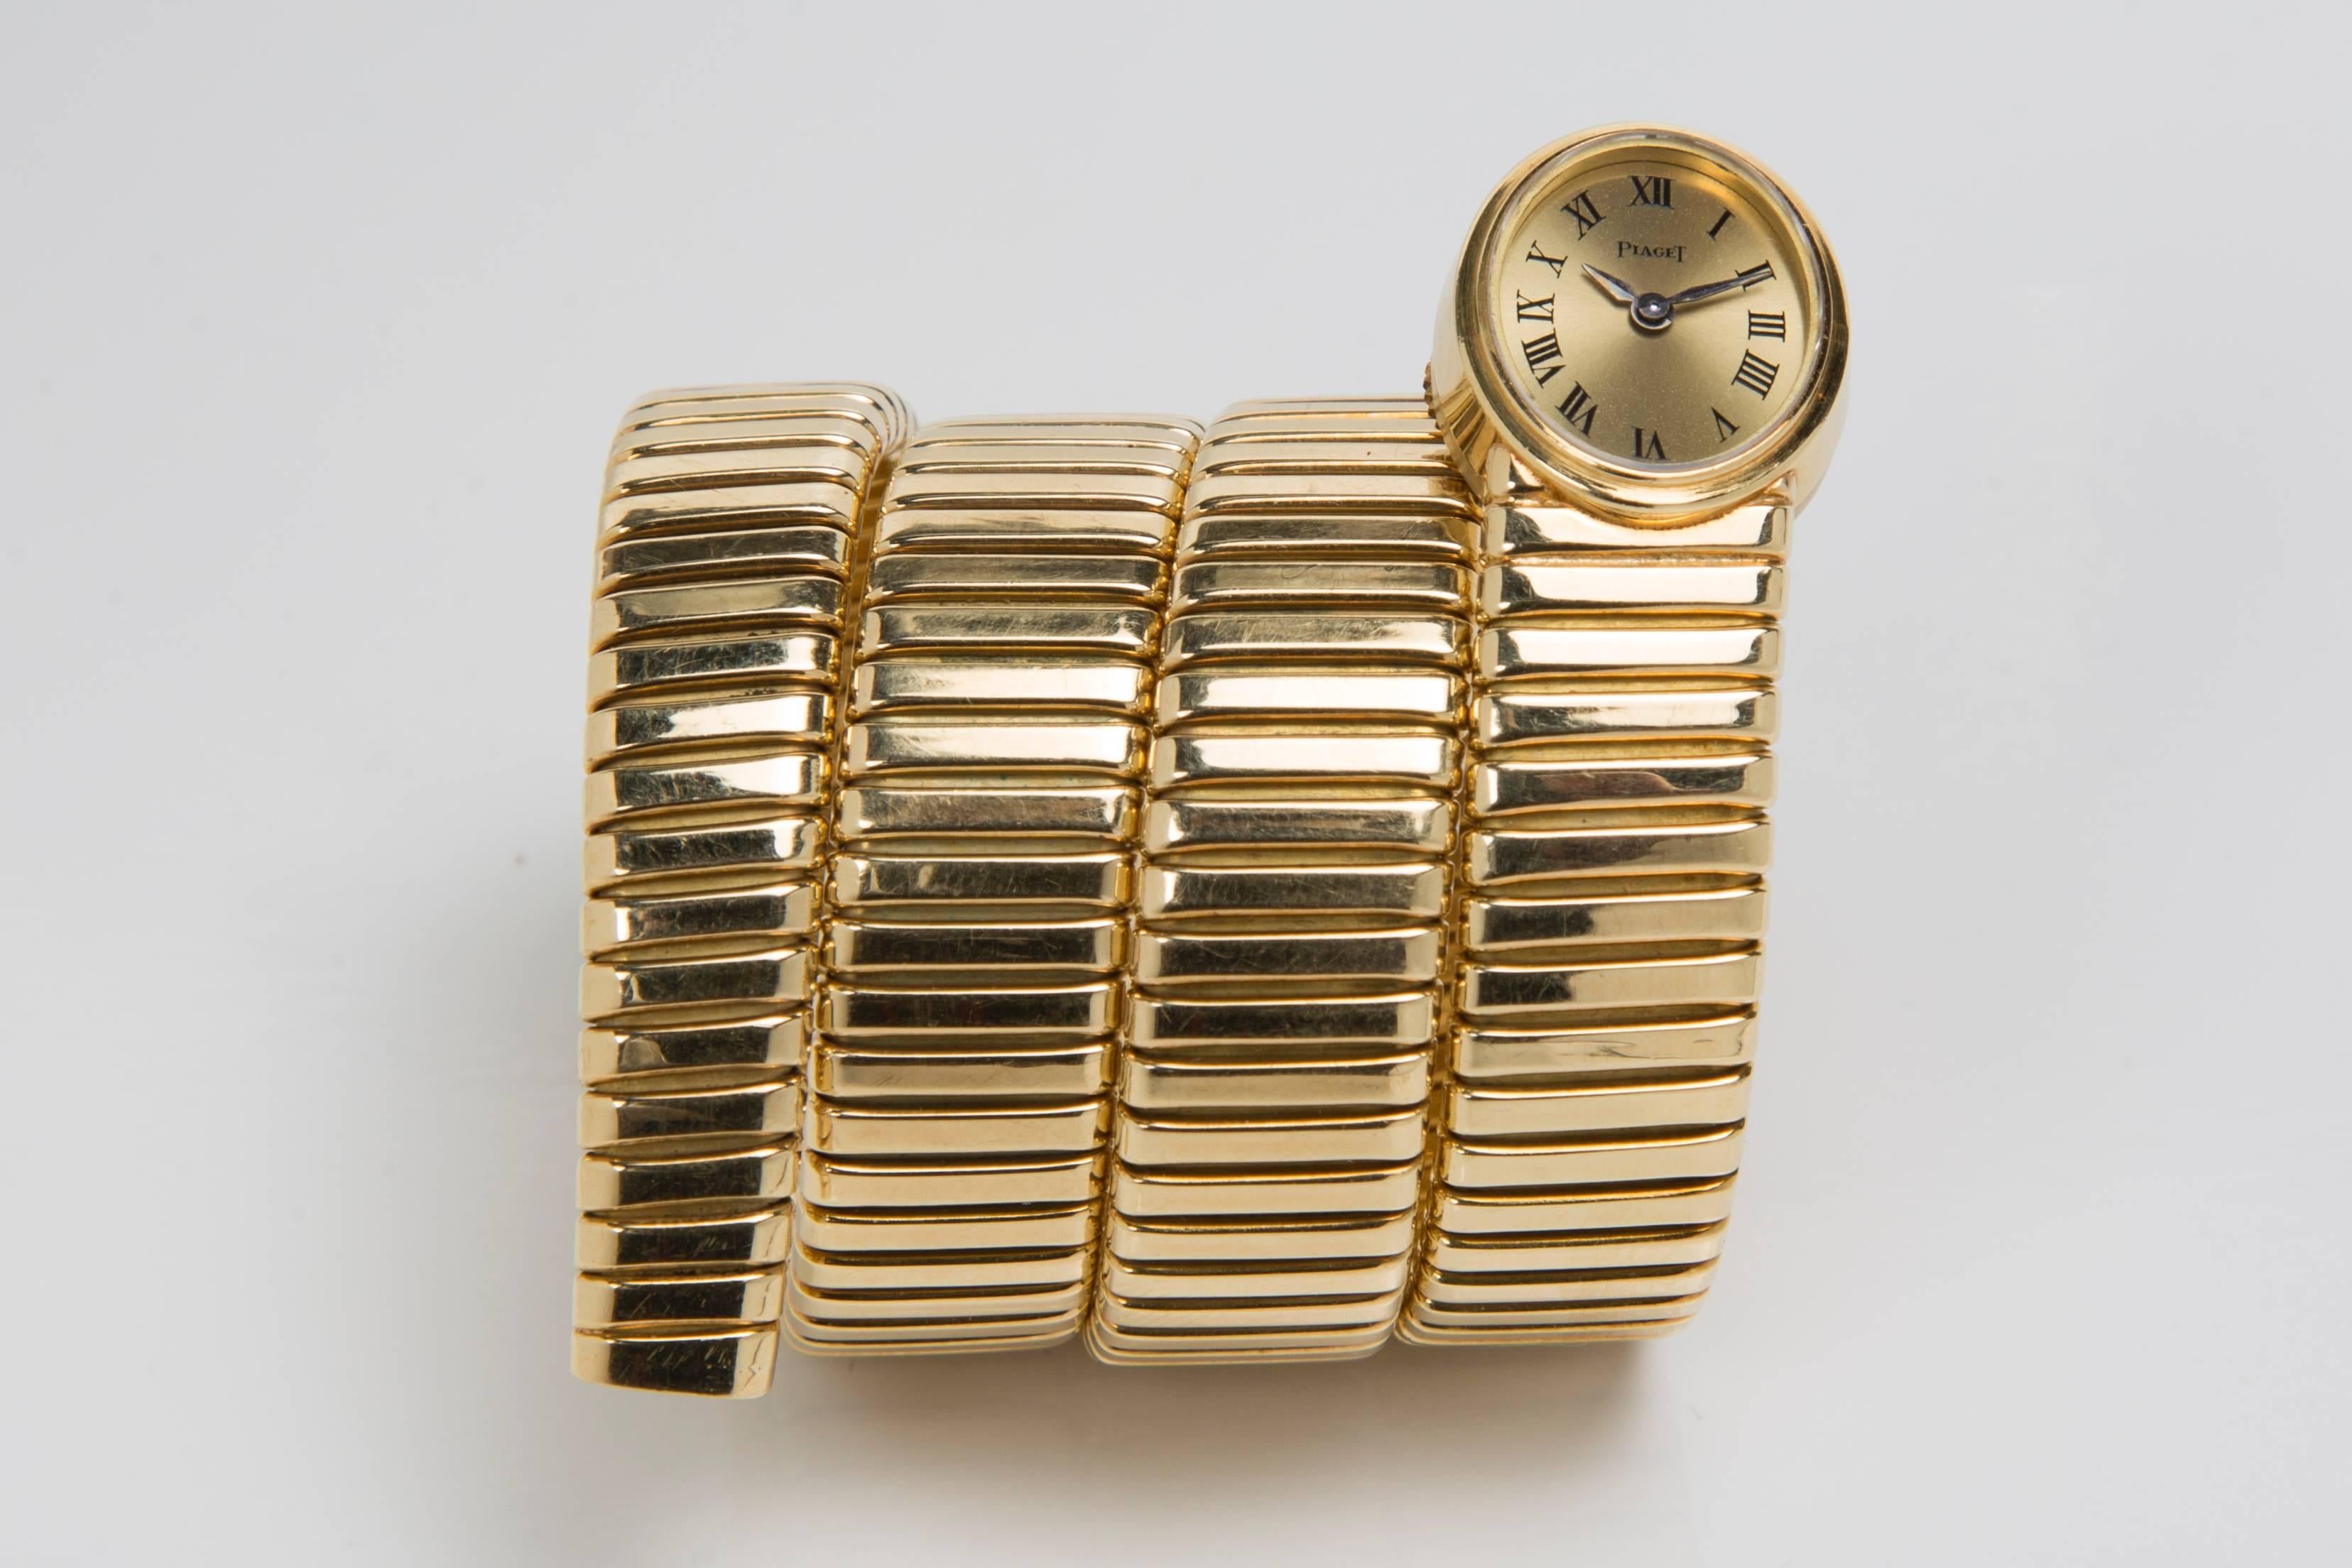 Piaget Serpent Watch
18K Yellow Gold 
Dial with Roman Numerals
Circa 1960